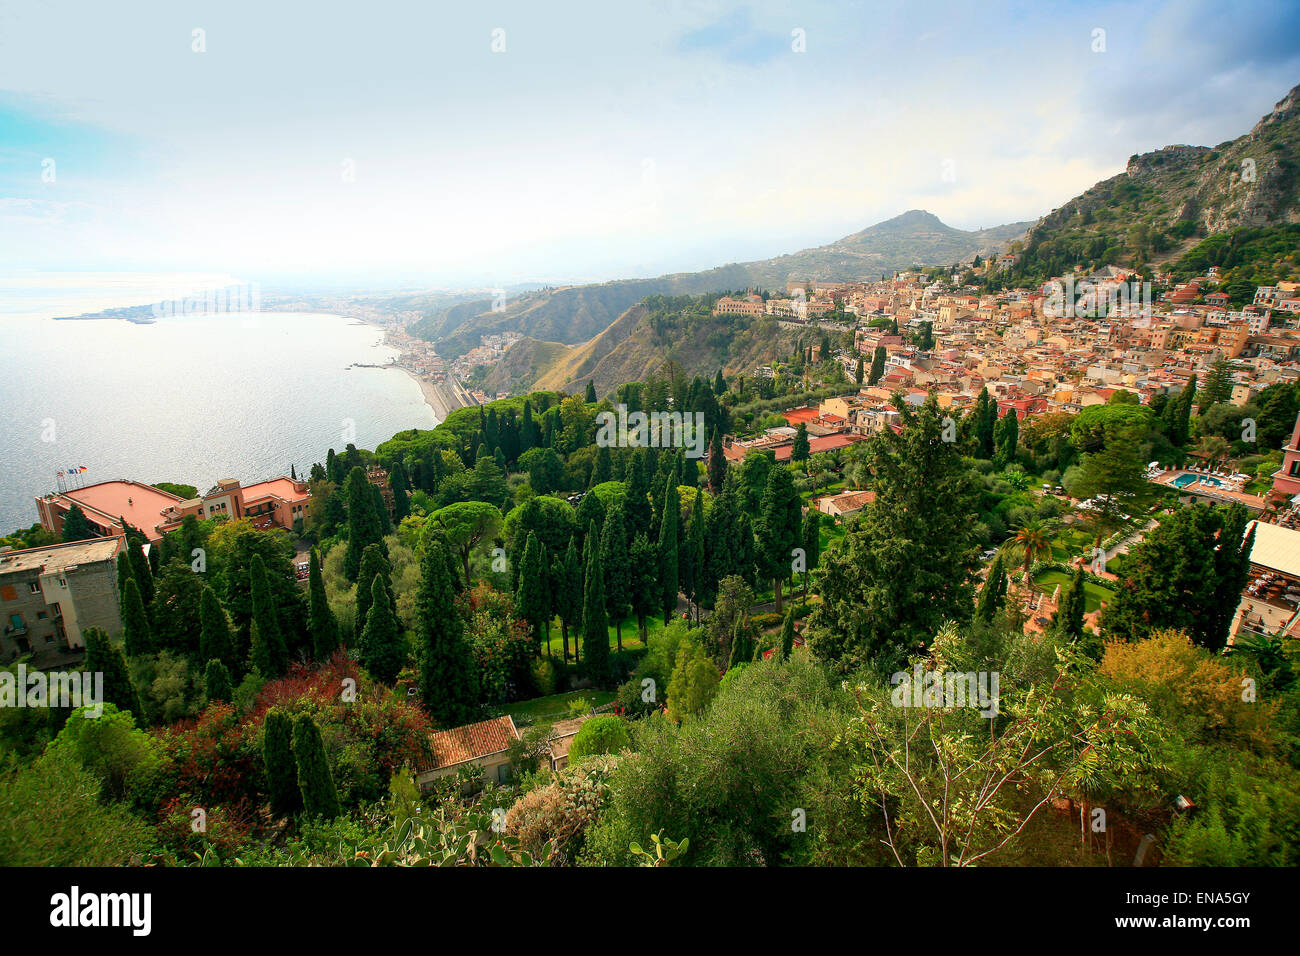 View over Taormina in Sicily with the Mediterranean and Sicilian coastline. Stock Photo